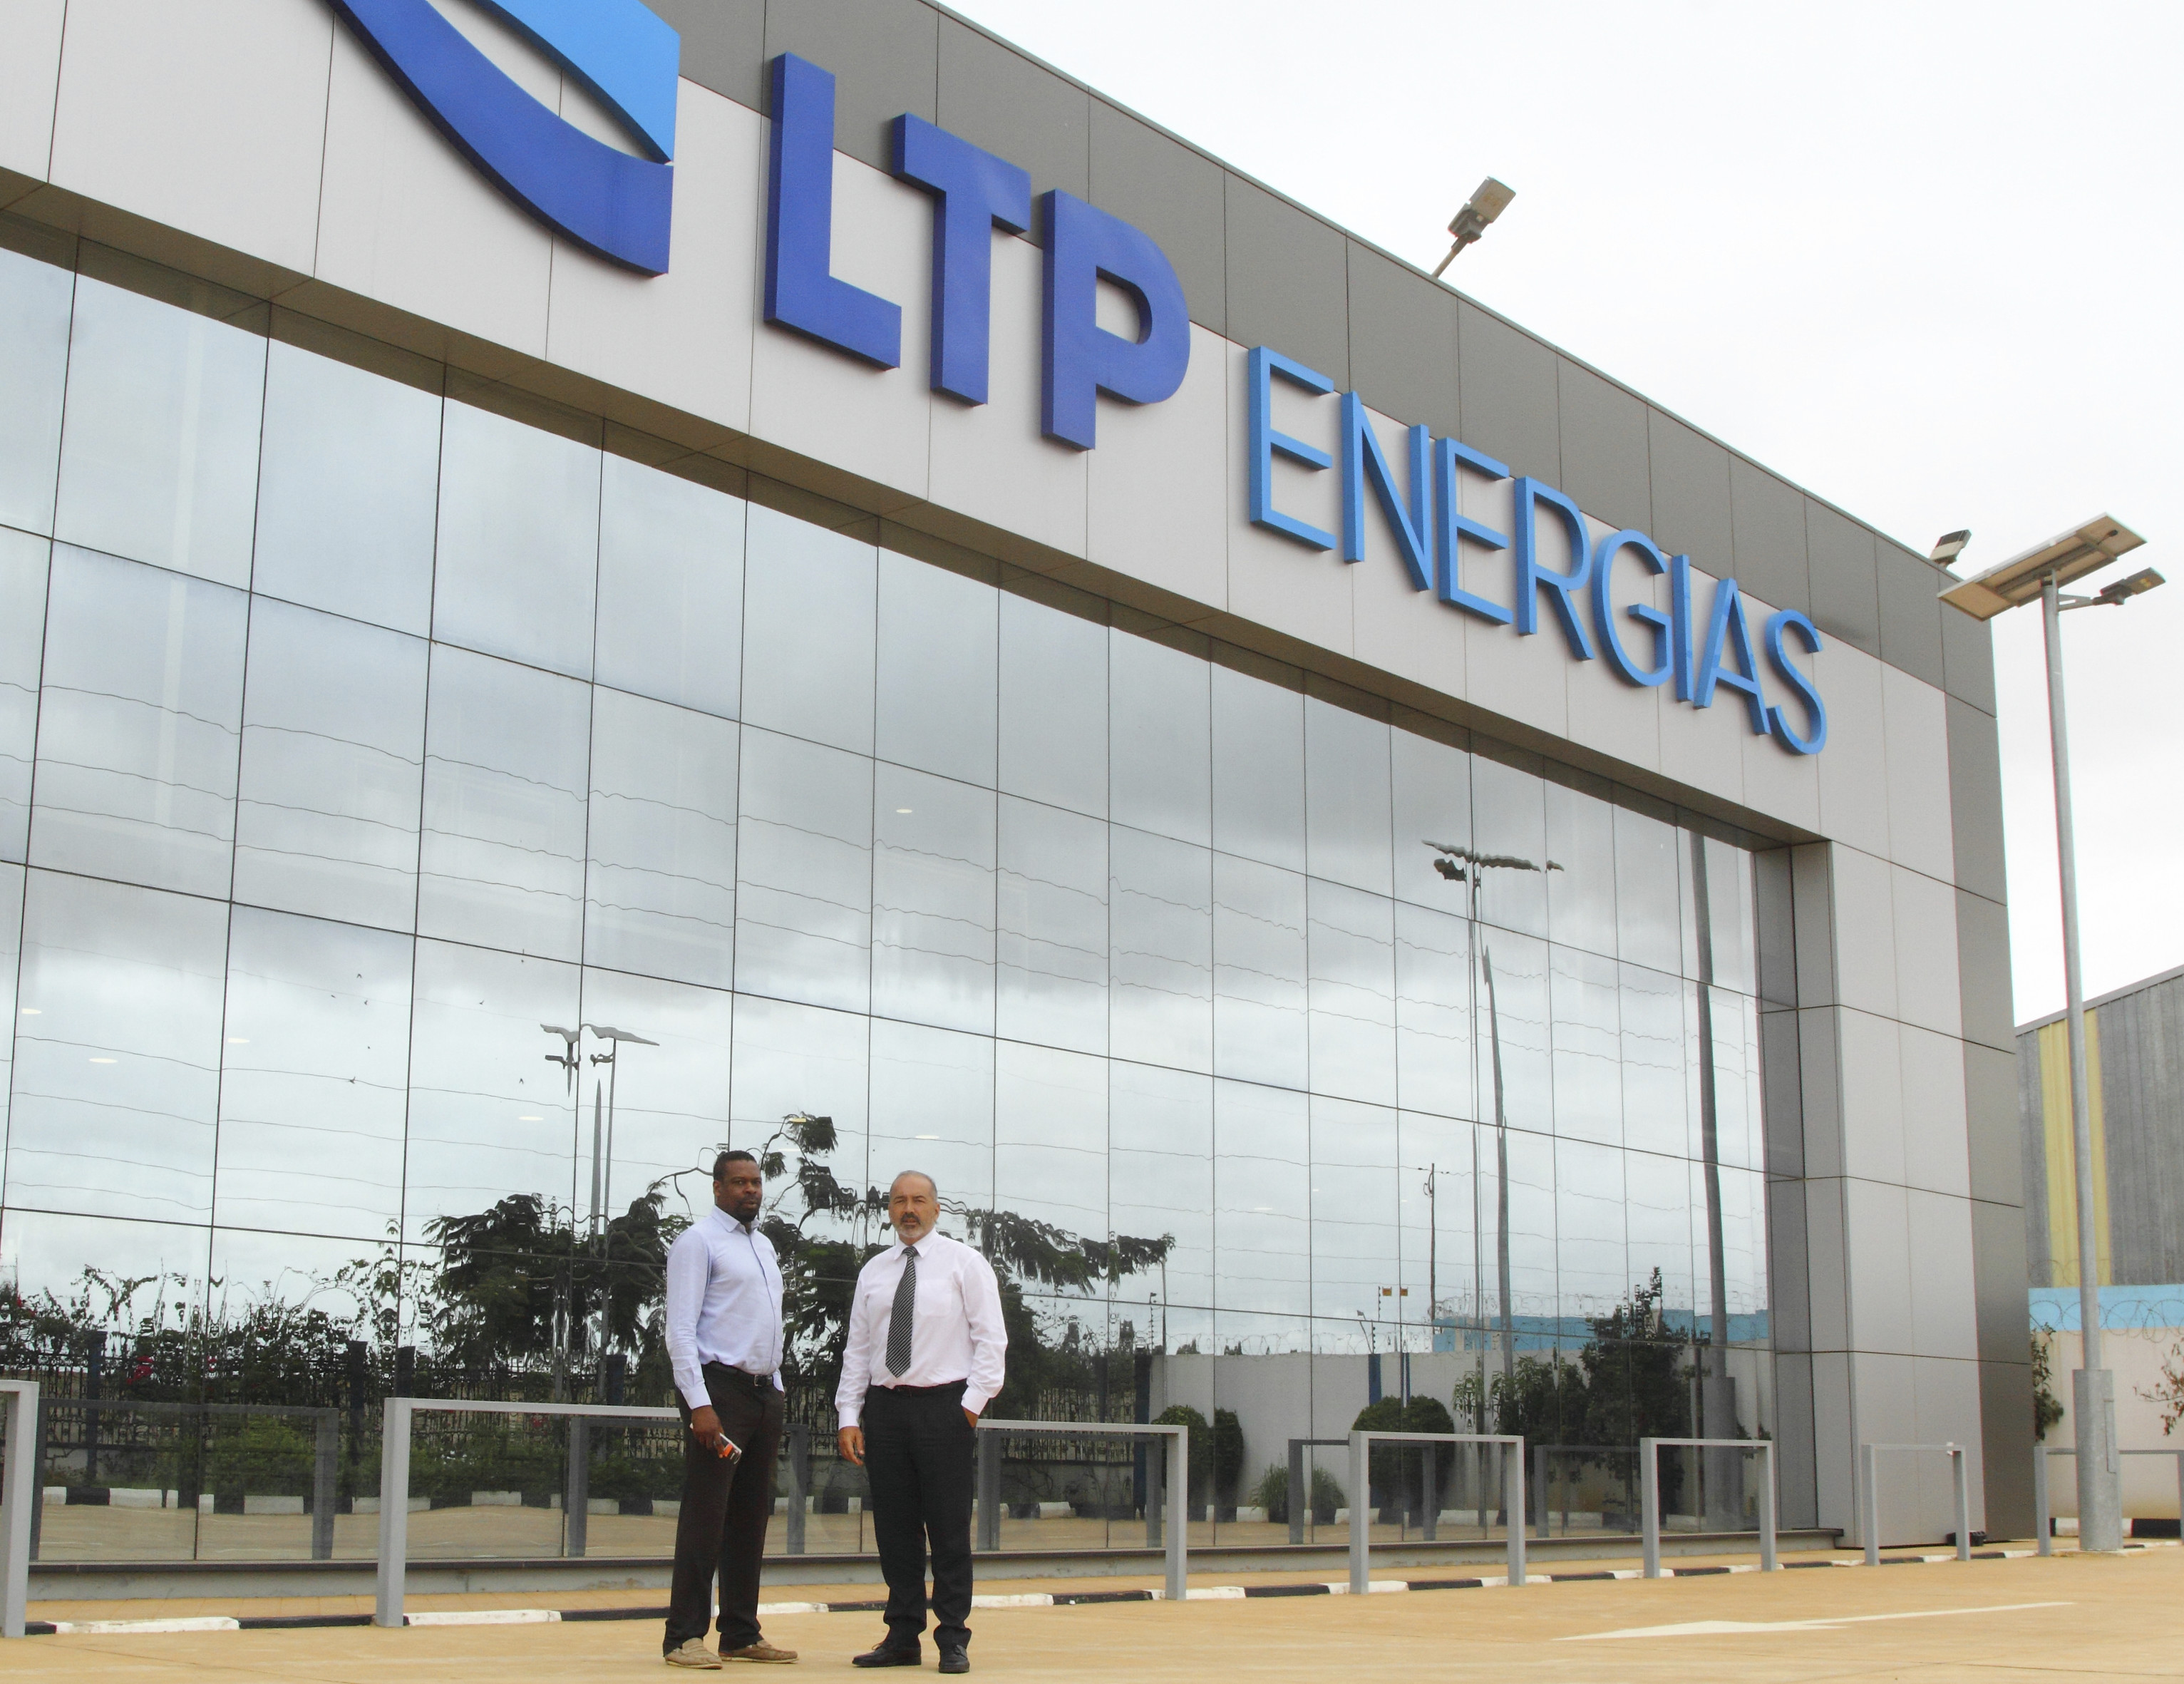 Carlos Garcia, commercial director, and Luís Figueiredo, general director of LTP Energias, in front of the company headquarters. - Credits: Lídia Onde